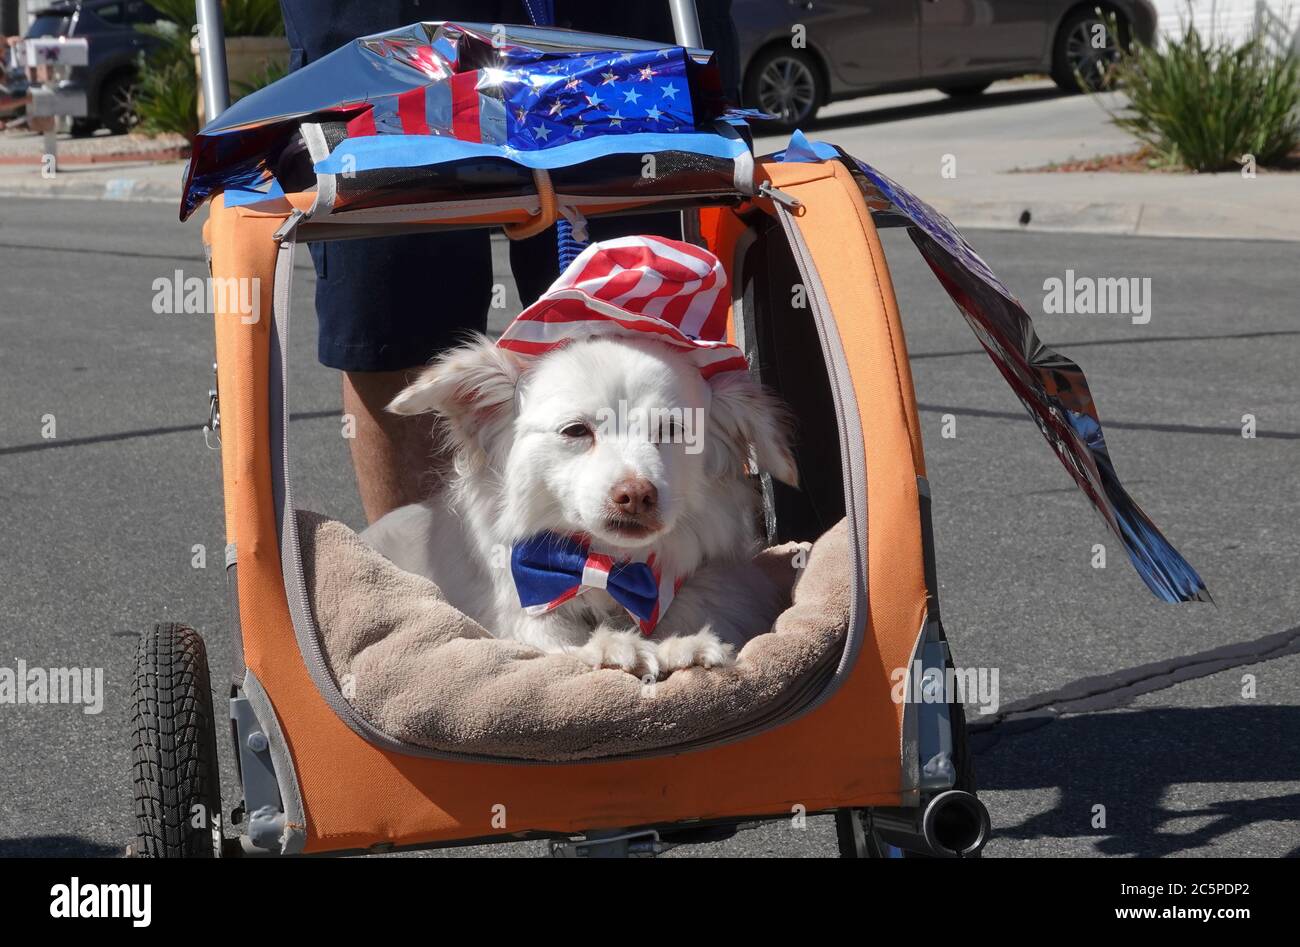 Cute white dog sits in a stroller dressed up for July 4th parade Stock Photo